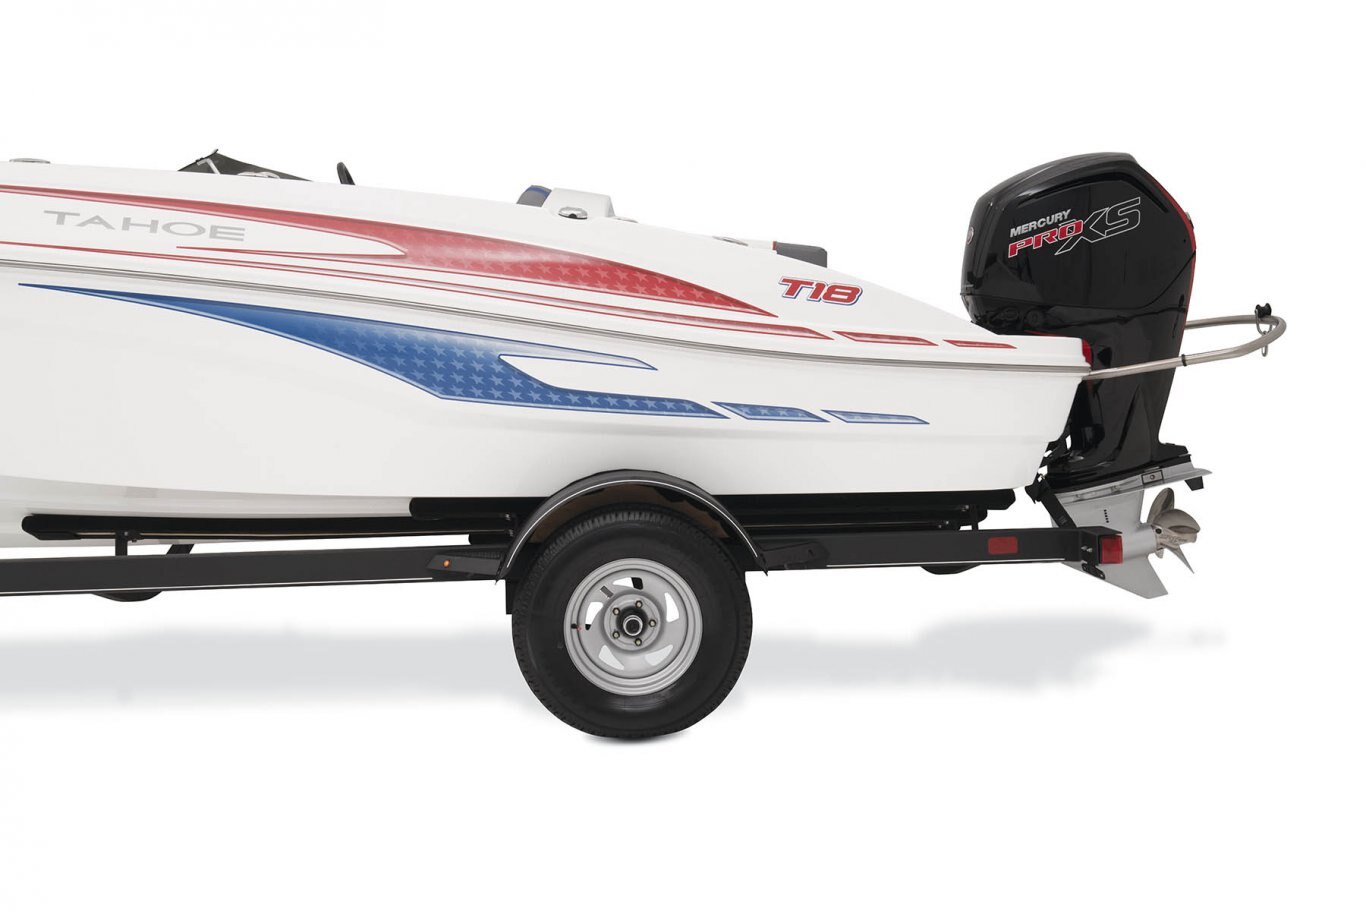 Tahoe T18 White / Red